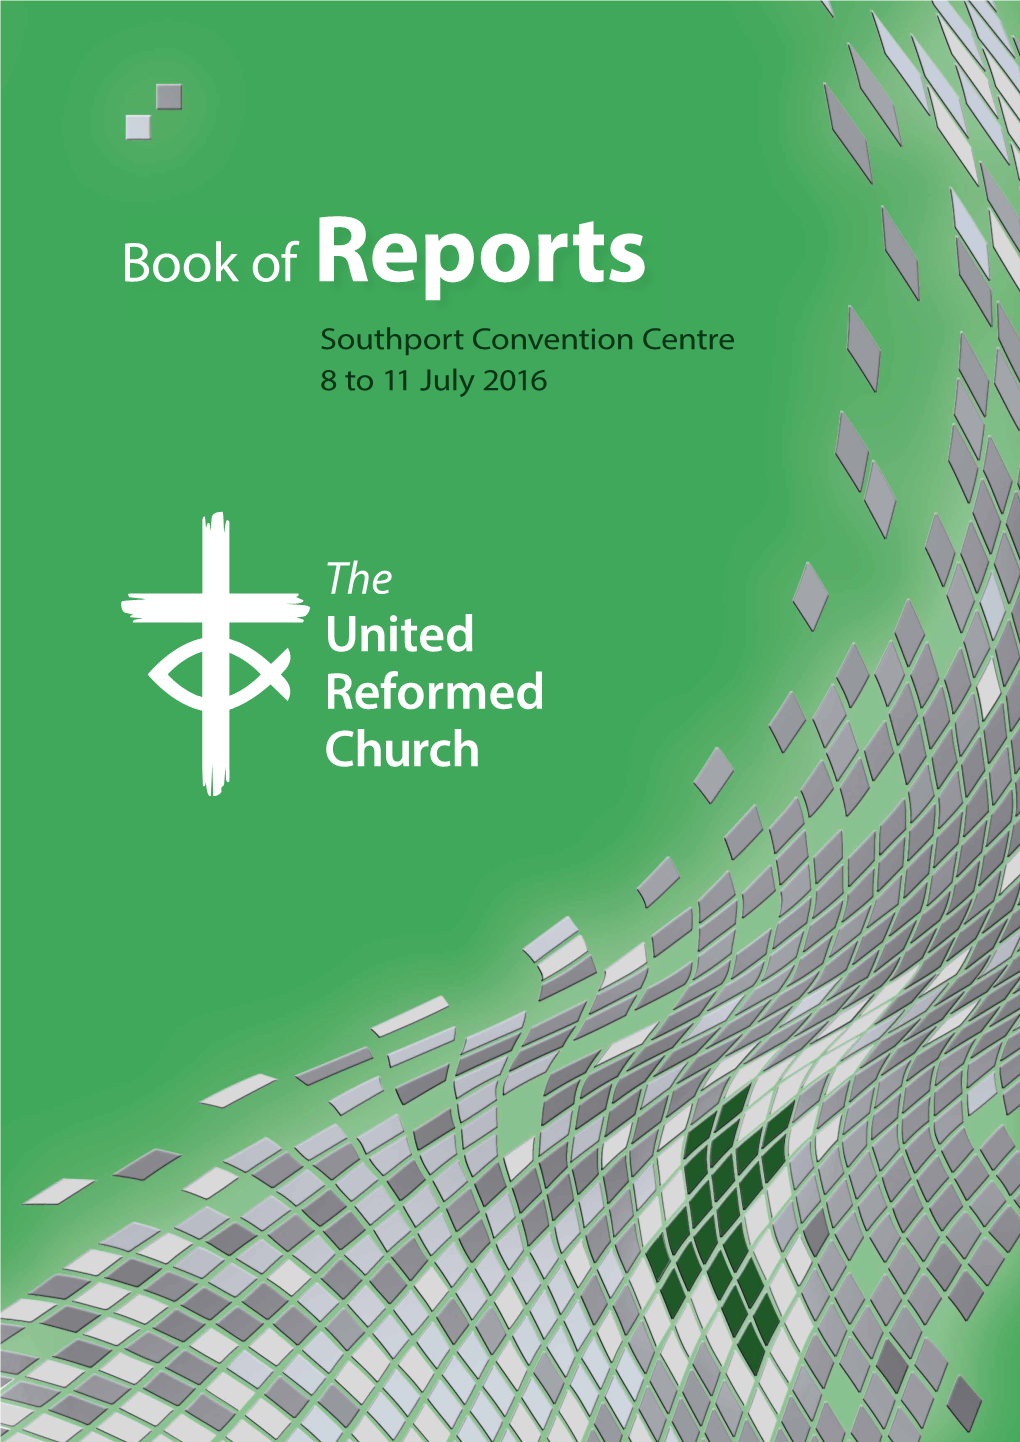 Book of Reports Southport Convention Centre 8 to 11 July 2016 © the United Reformed Church, 2016